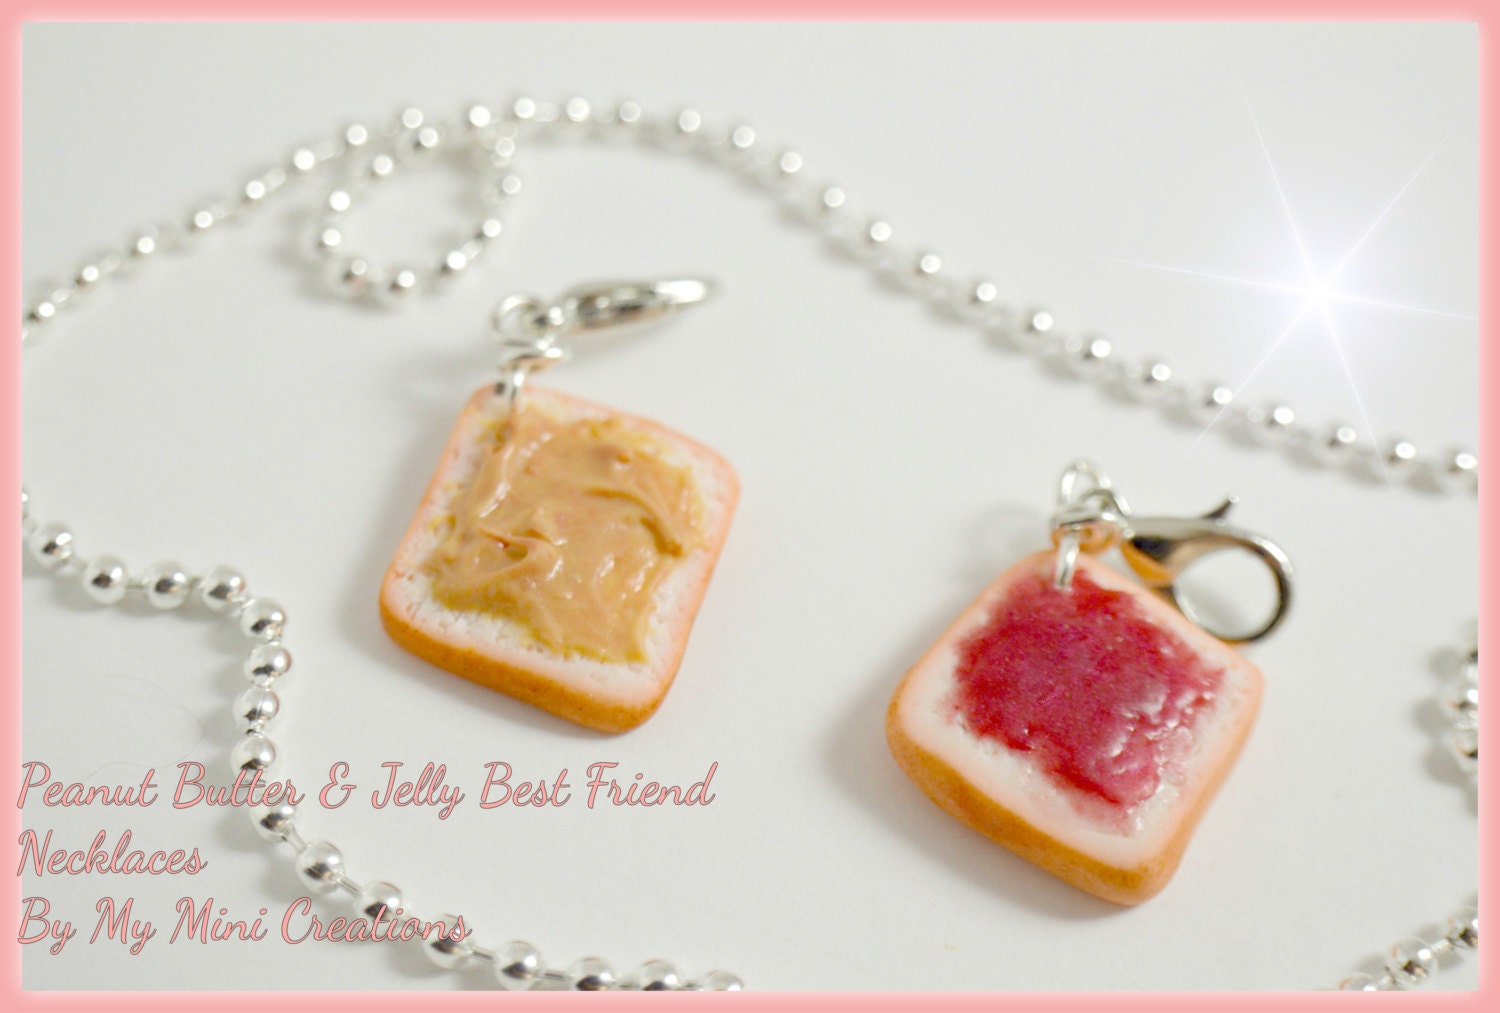 Friendship necklace Best friend gifts handmade by fwirl on Etsy | Bff  necklaces, Friendship necklaces, Friendship jewelry